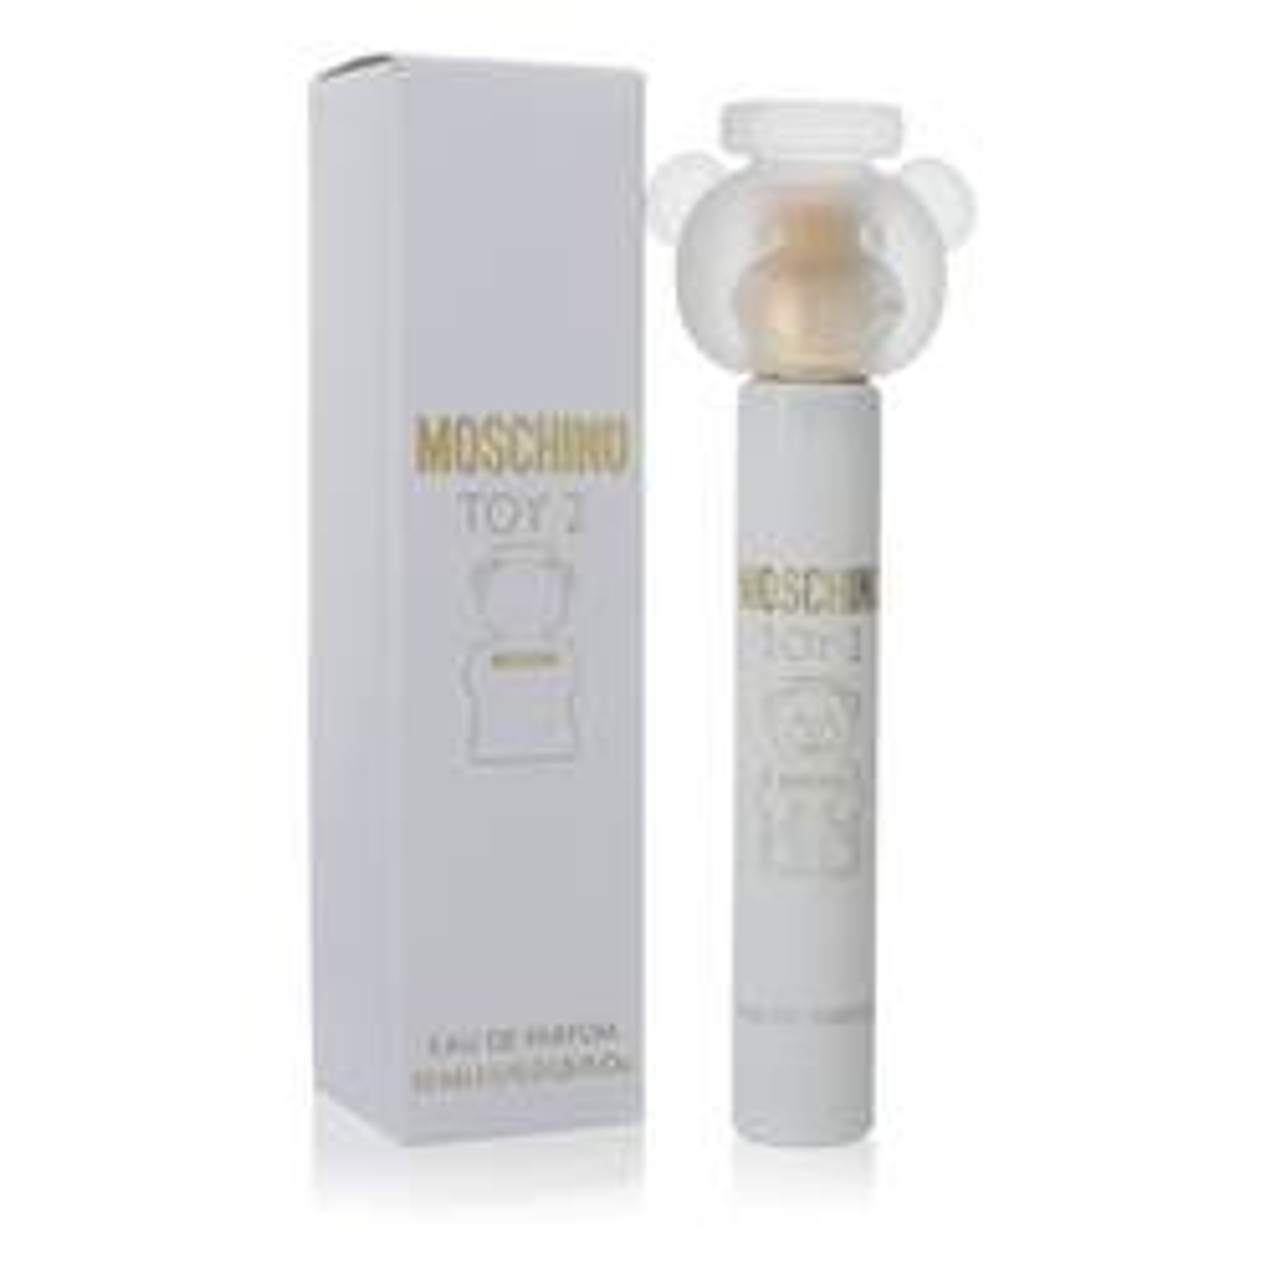 Moschino Toy 2 Perfume By Moschino Mini EDP 0.17 oz for Women - [From 27.00 - Choose pk Qty ] - *Ships from Miami